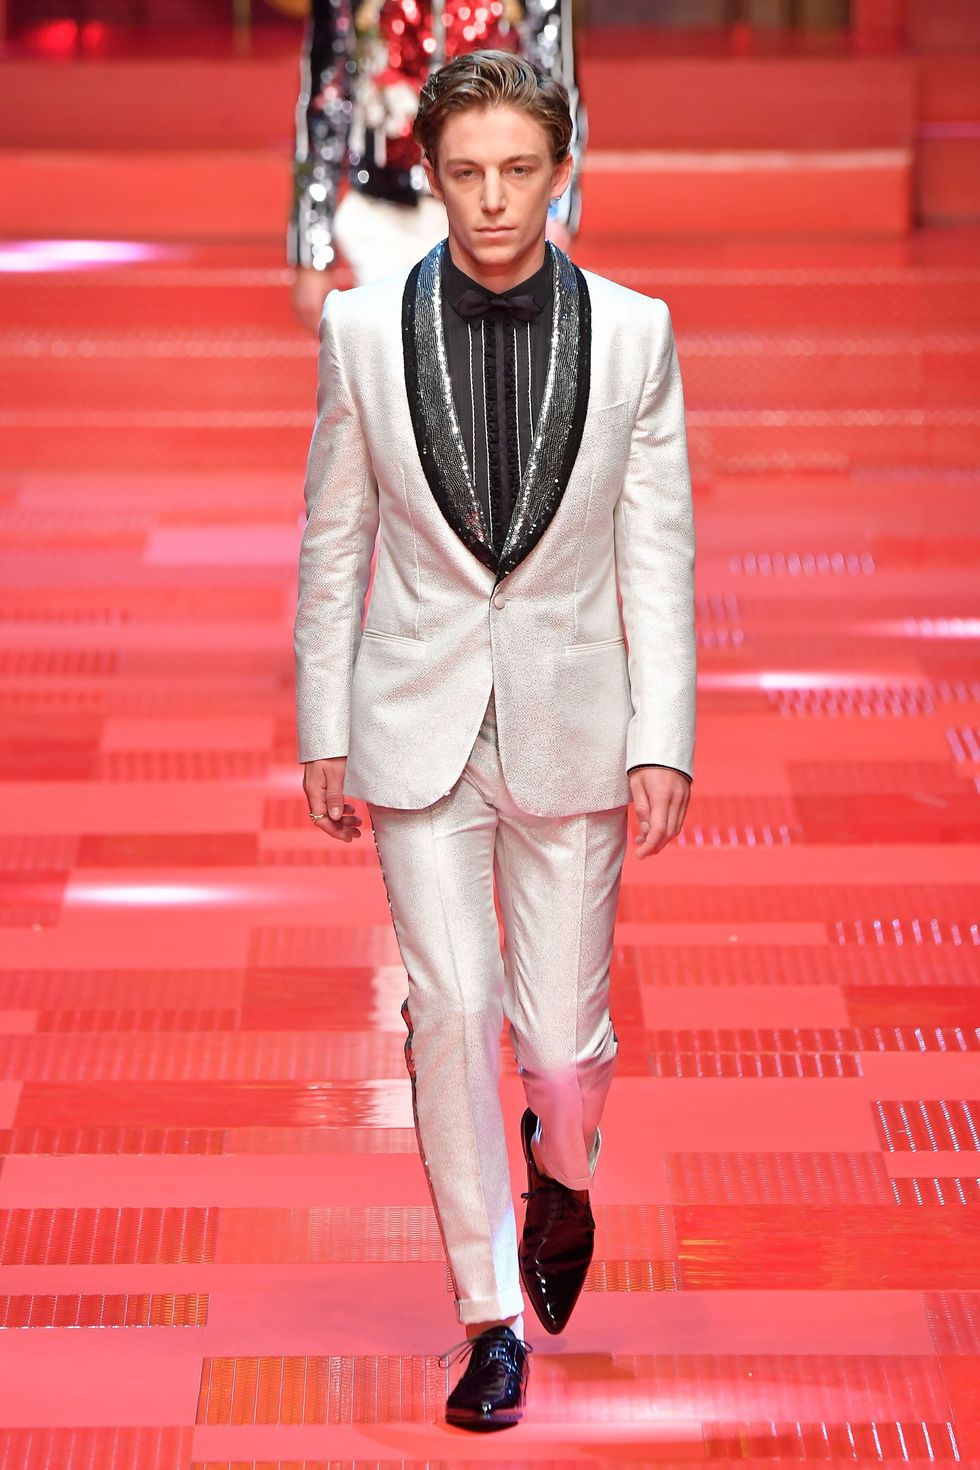 Fashion, Suit, White, Fashion model, Clothing, Runway, Red, Formal wear, Fashion show, Haute couture, 